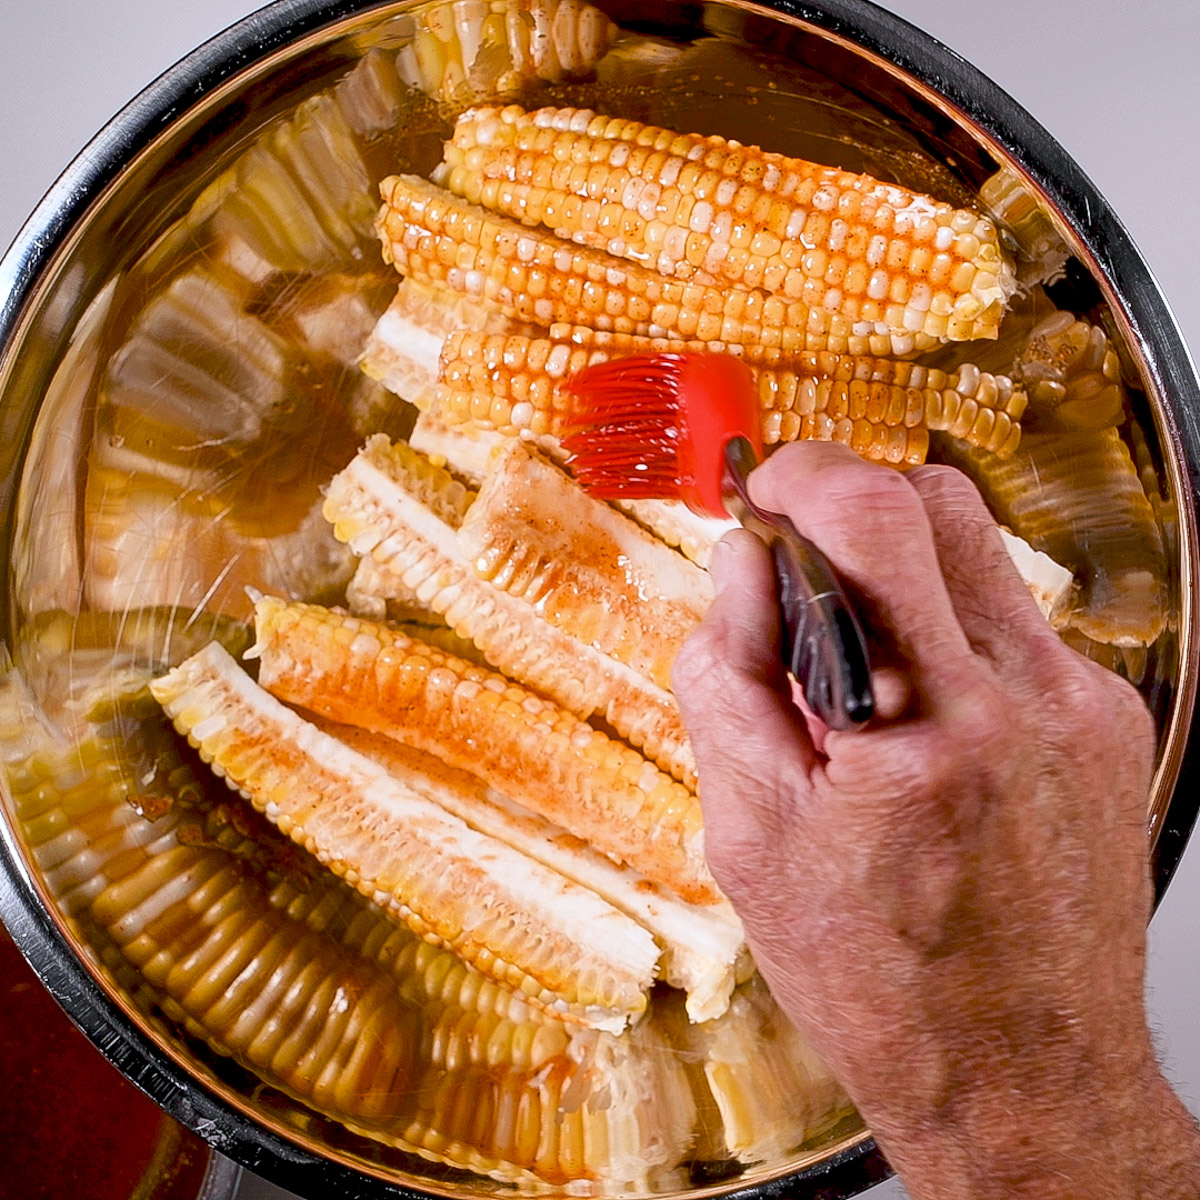 Brush the corn ribs with the marinade.